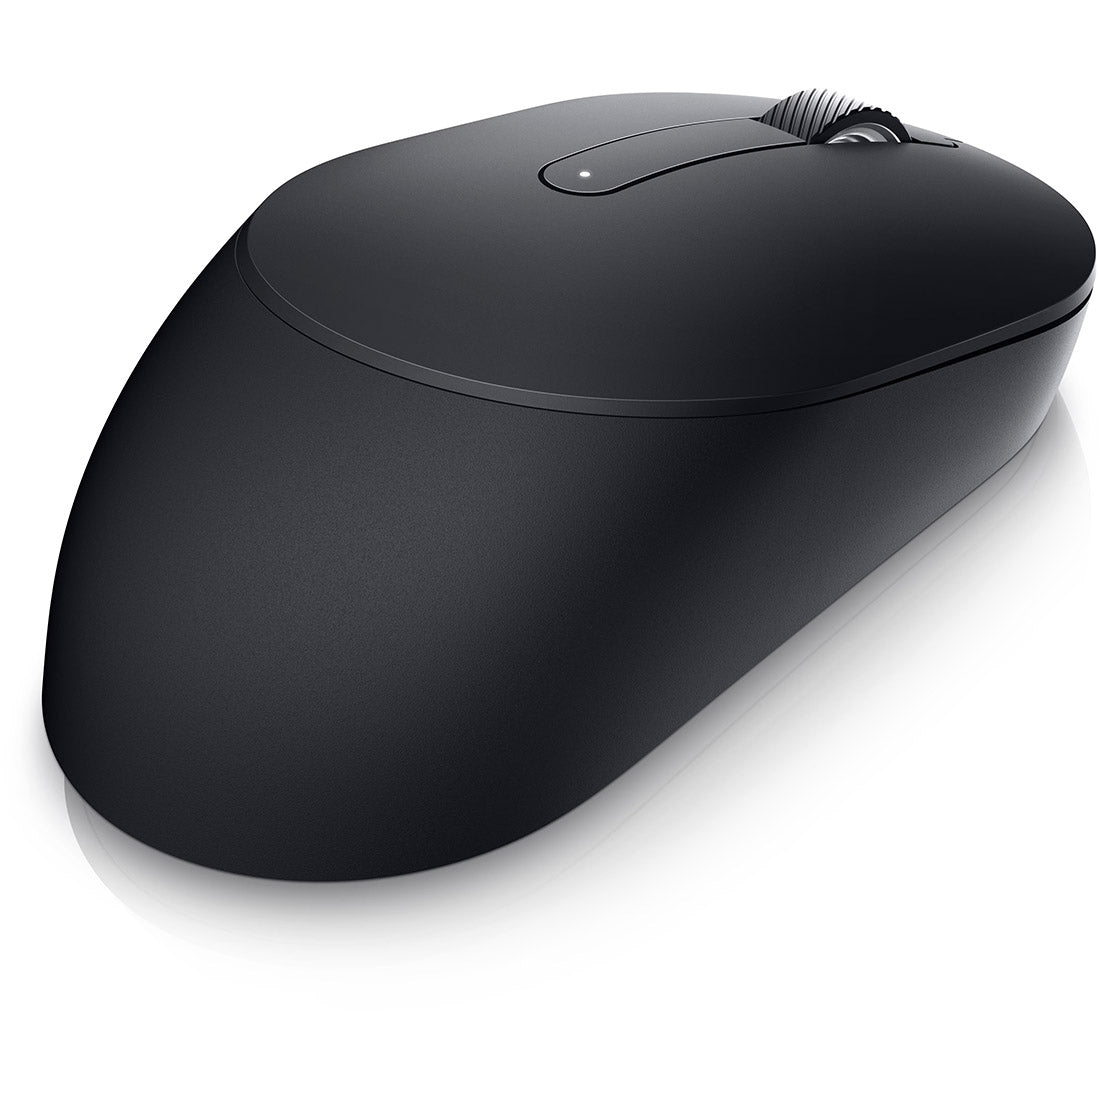 Dell MS300 Optical Wireless Mouse